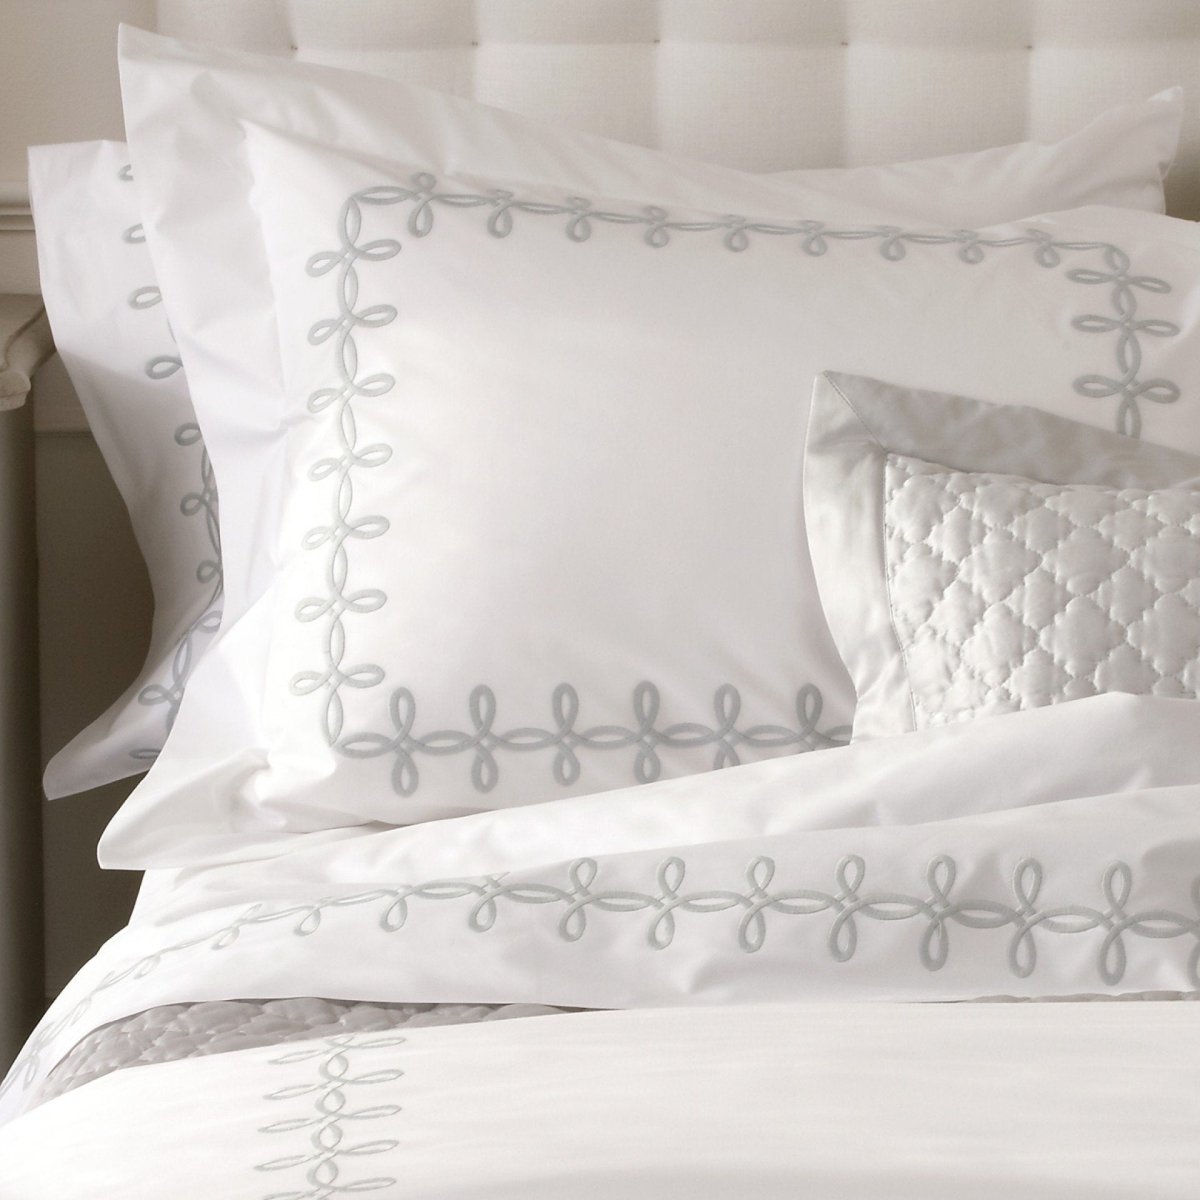 Fig Linens and Home - Matouk Luxury Bed Linens - Gordian Knot Silver Bedding